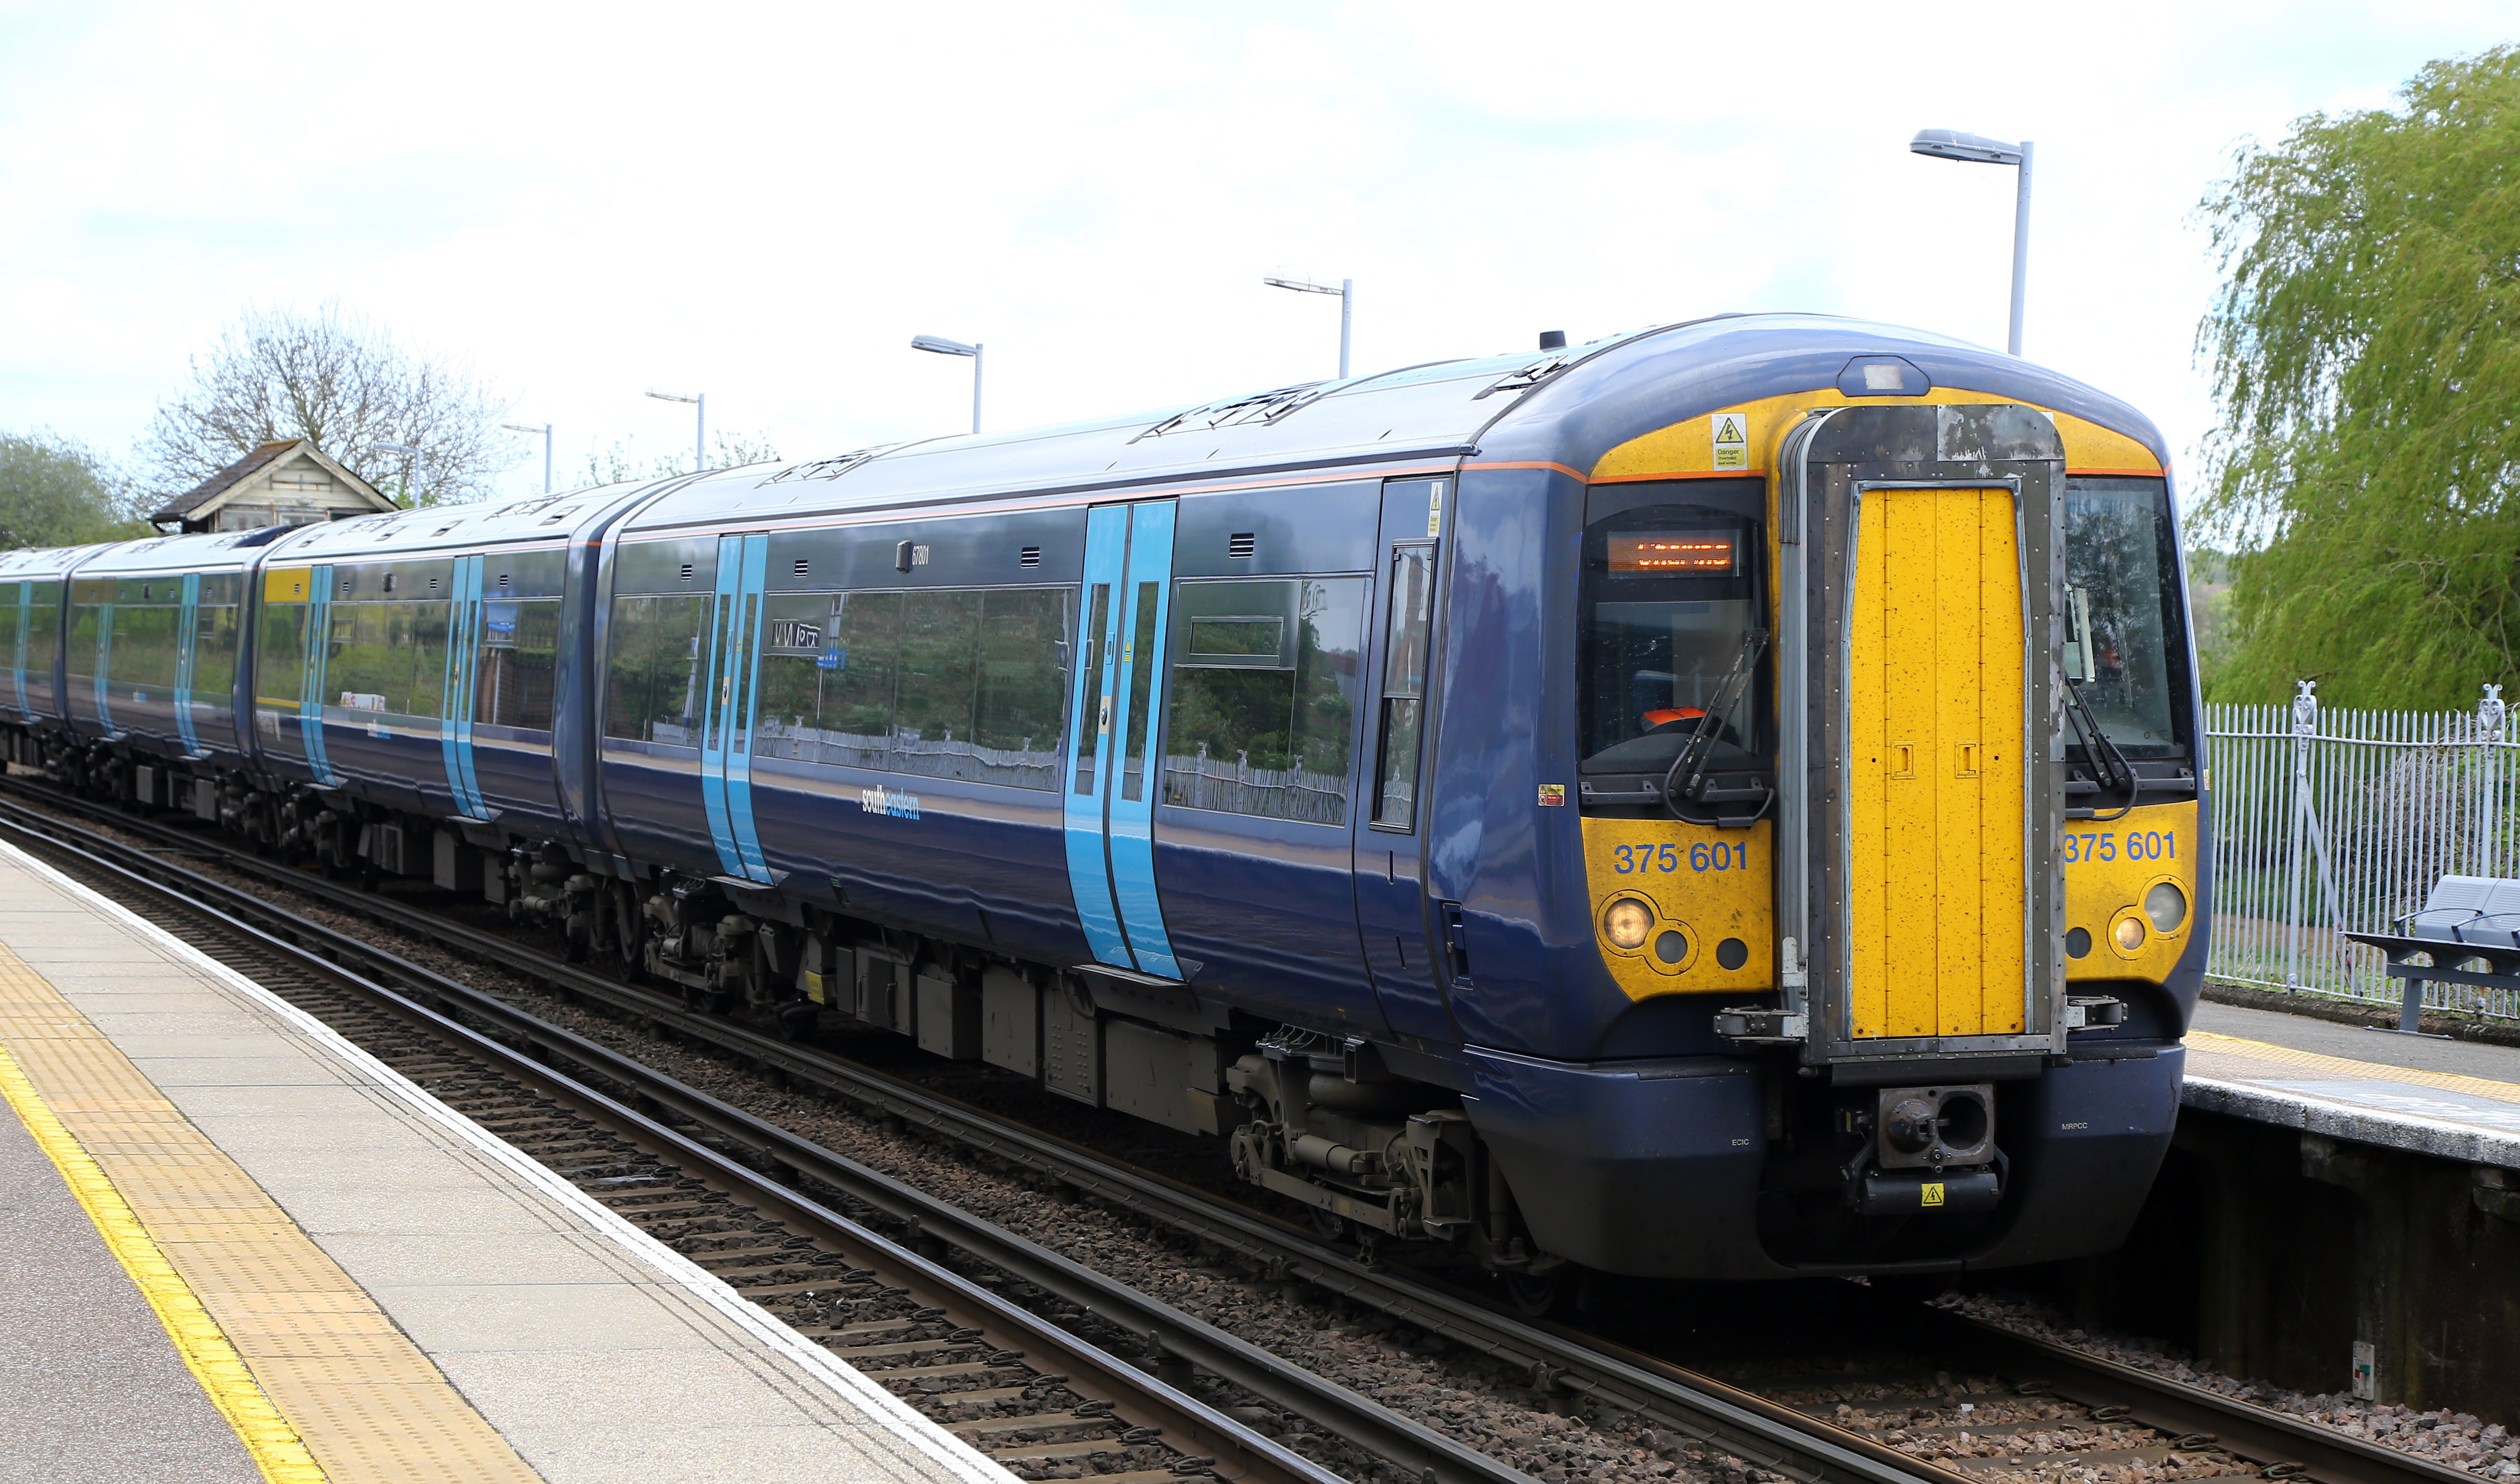 Southeastern’s decision to reorder the timetable was made without public consultation